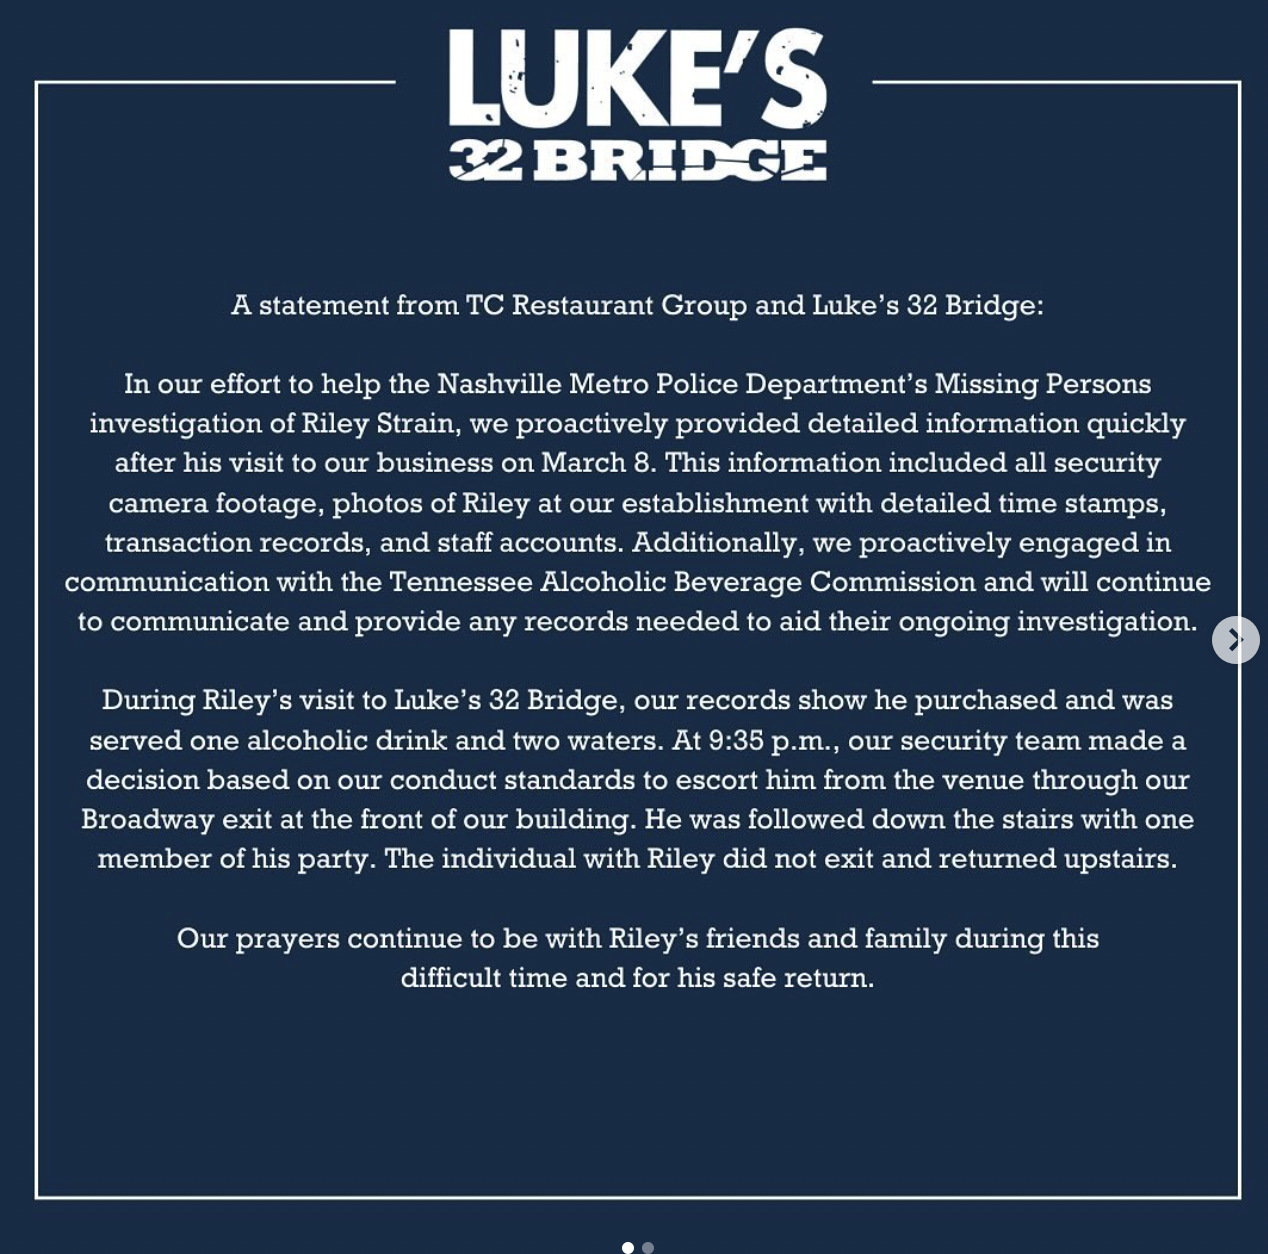 The statement of Luke's 32 Bridge as shared on its social media following Riley Strain's disappearance | Source: instagram/lukes32bridge